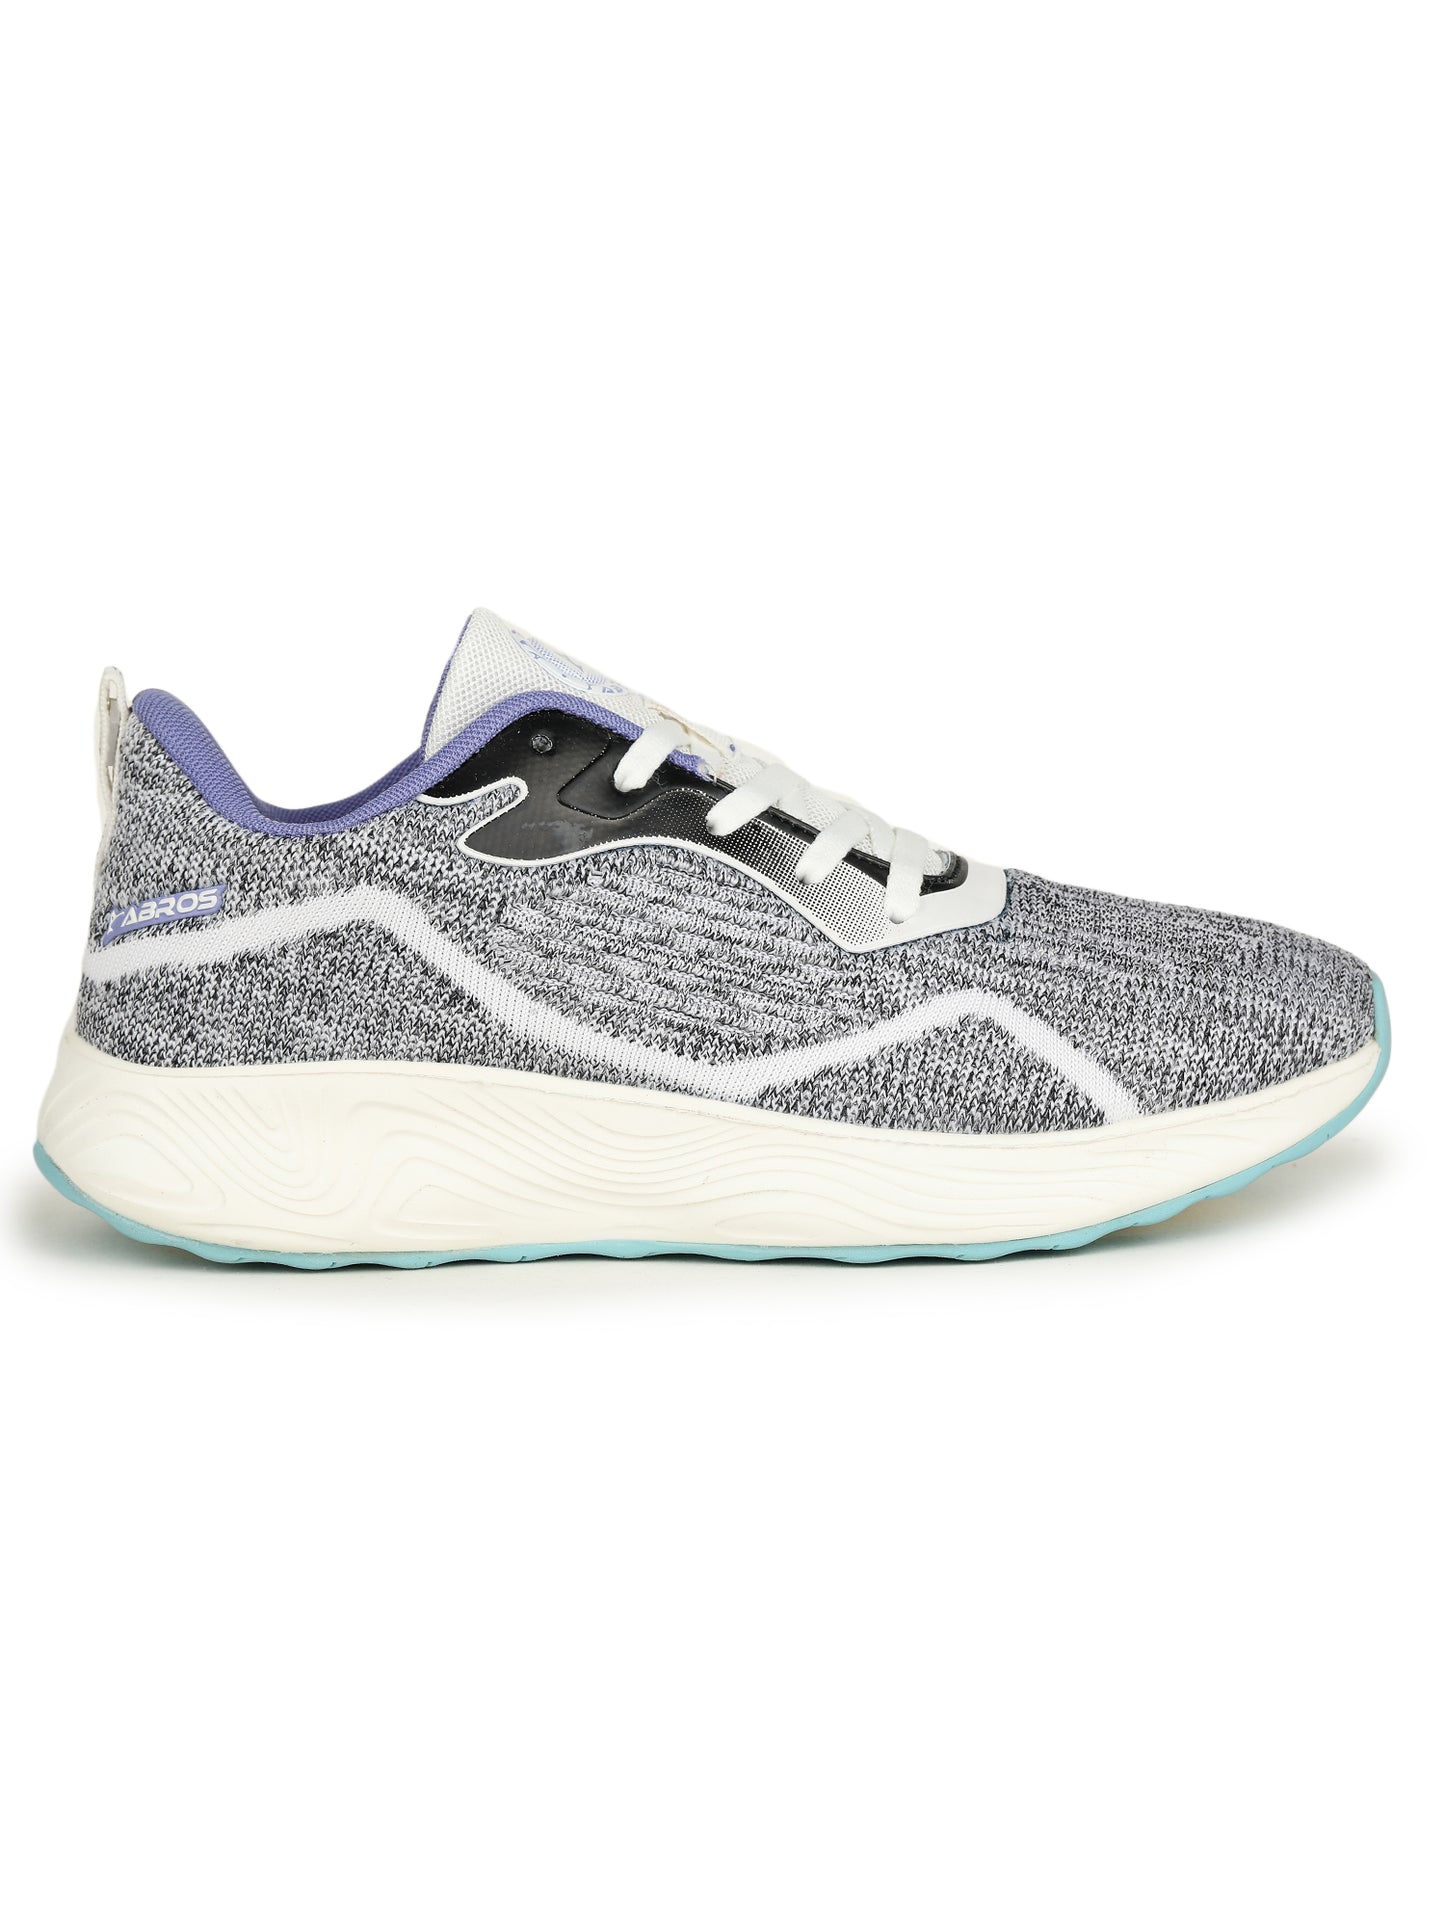 ABROS CORAL SPORTS SHOES FOR WOMEN